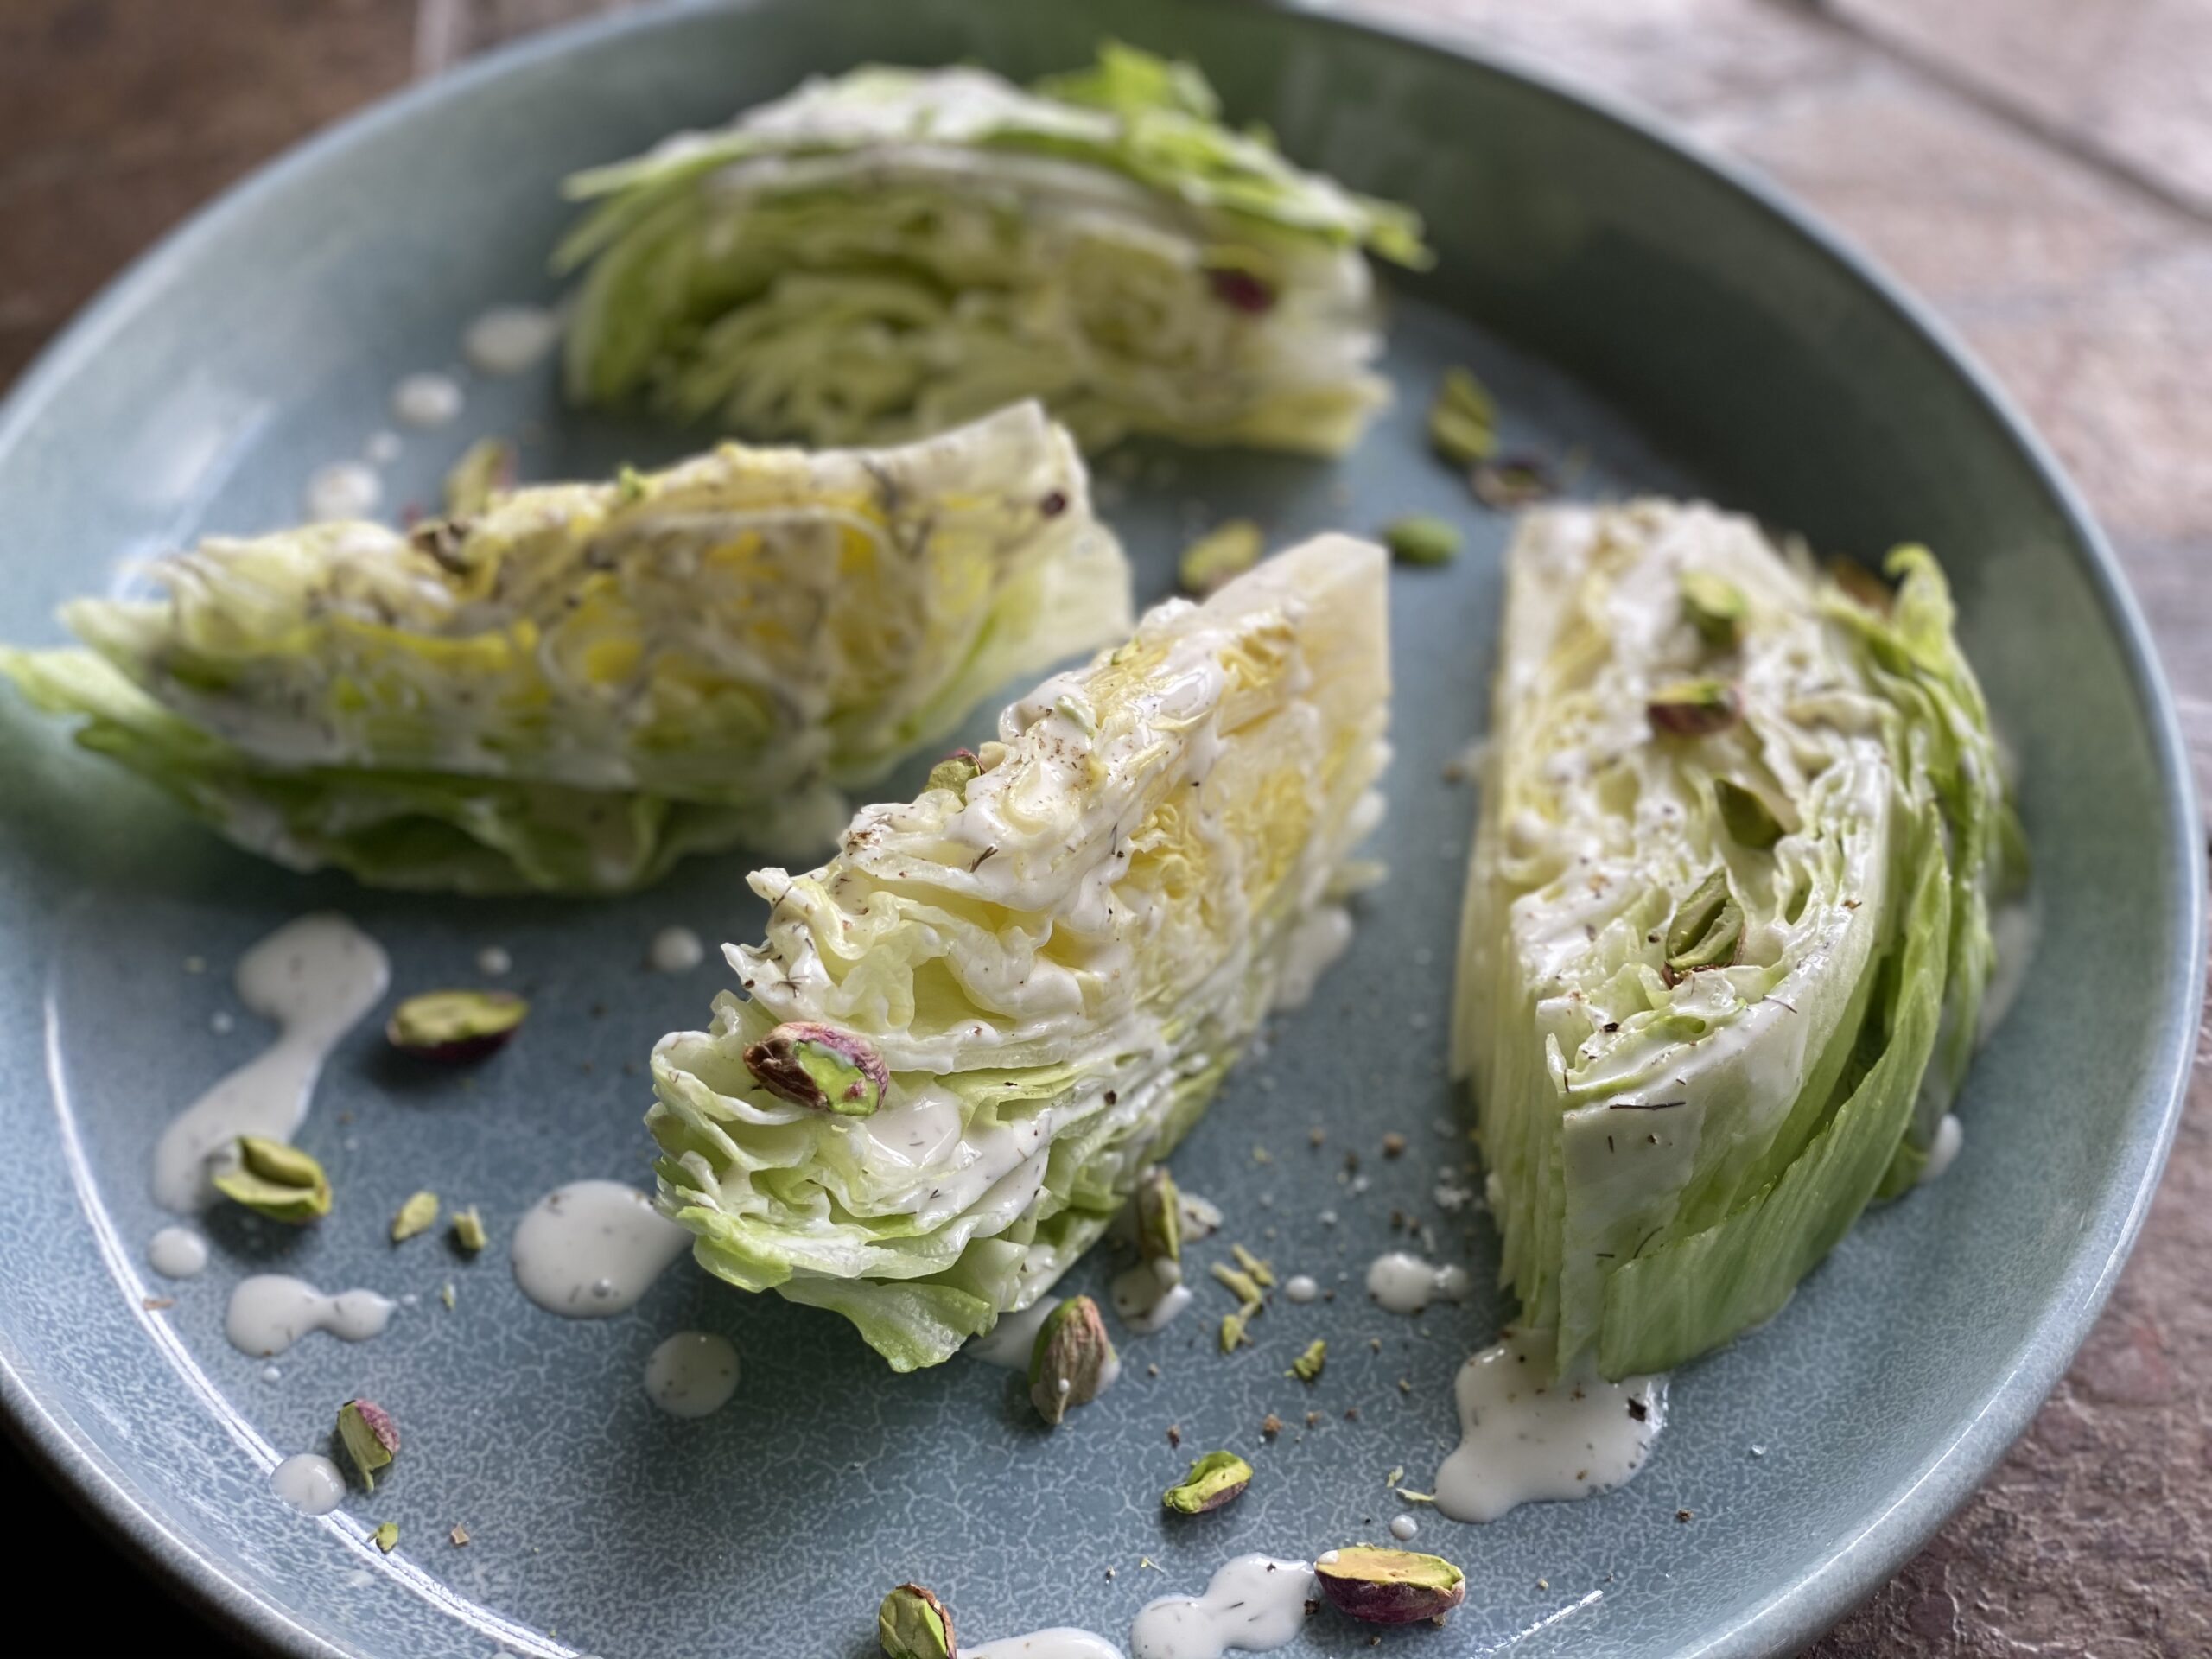 Iceberg Lettuce Wedge Salad with Blue Cheese Dressing